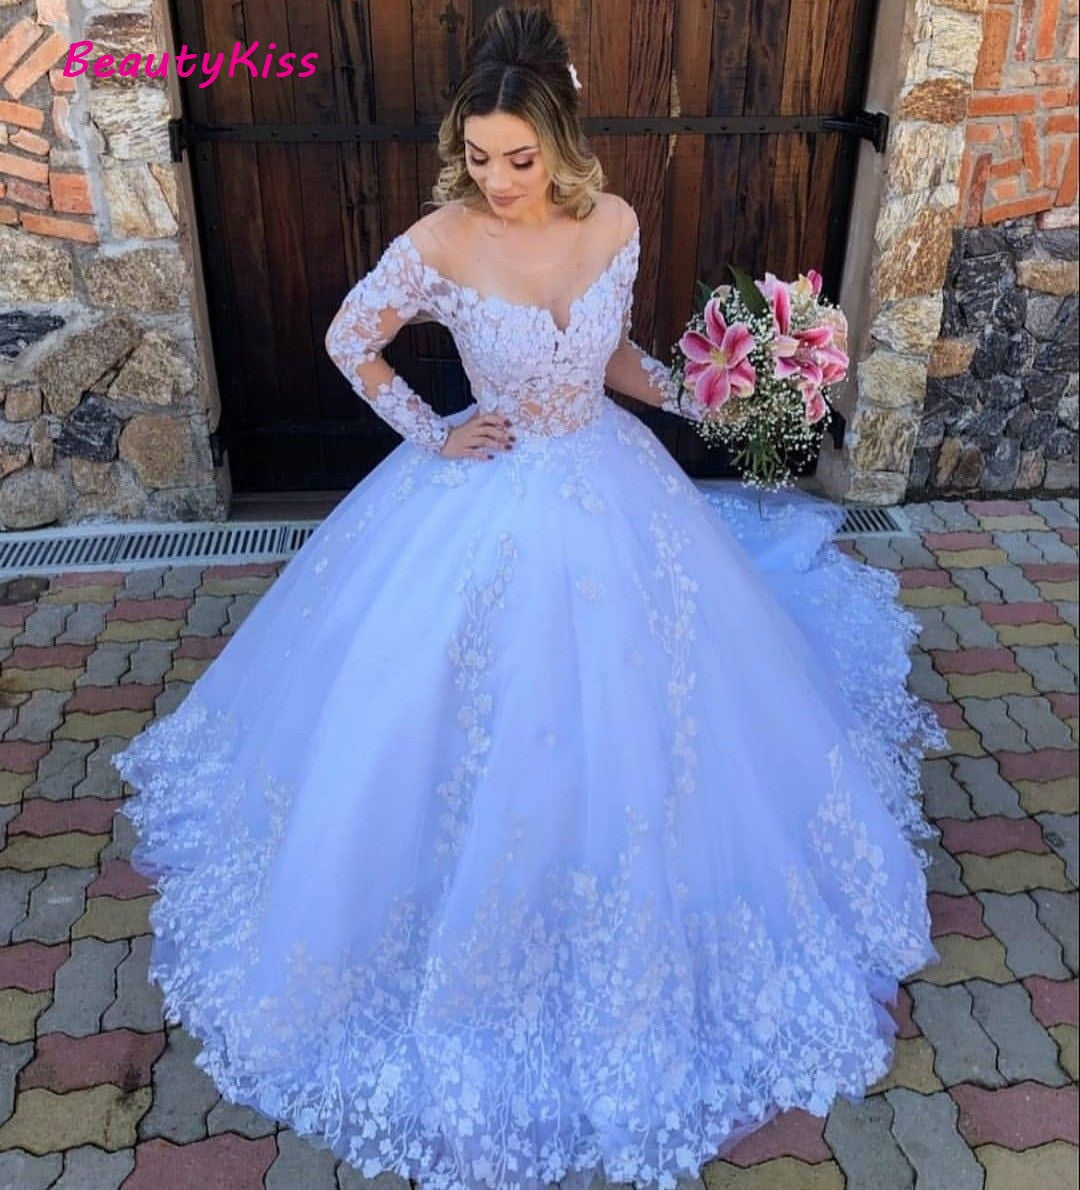 Princess Ball Gown Lace Appliques Long Sleeves Wedding Gowns Plus Size Robe Wedding Dress The Clothing Company Sydney